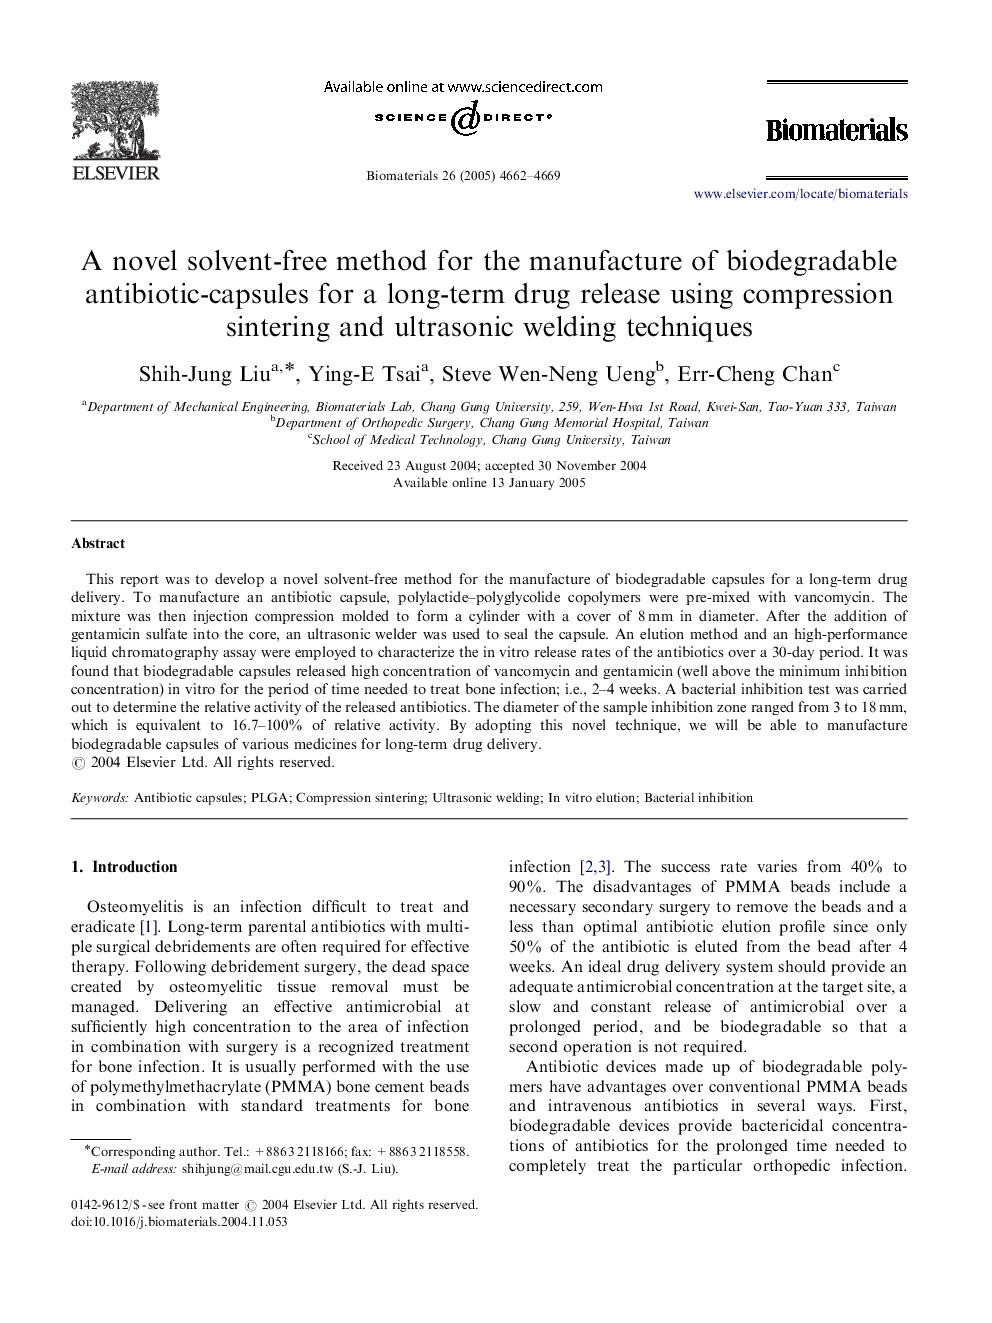 A novel solvent-free method for the manufacture of biodegradable antibiotic-capsules for a long-term drug release using compression sintering and ultrasonic welding techniques